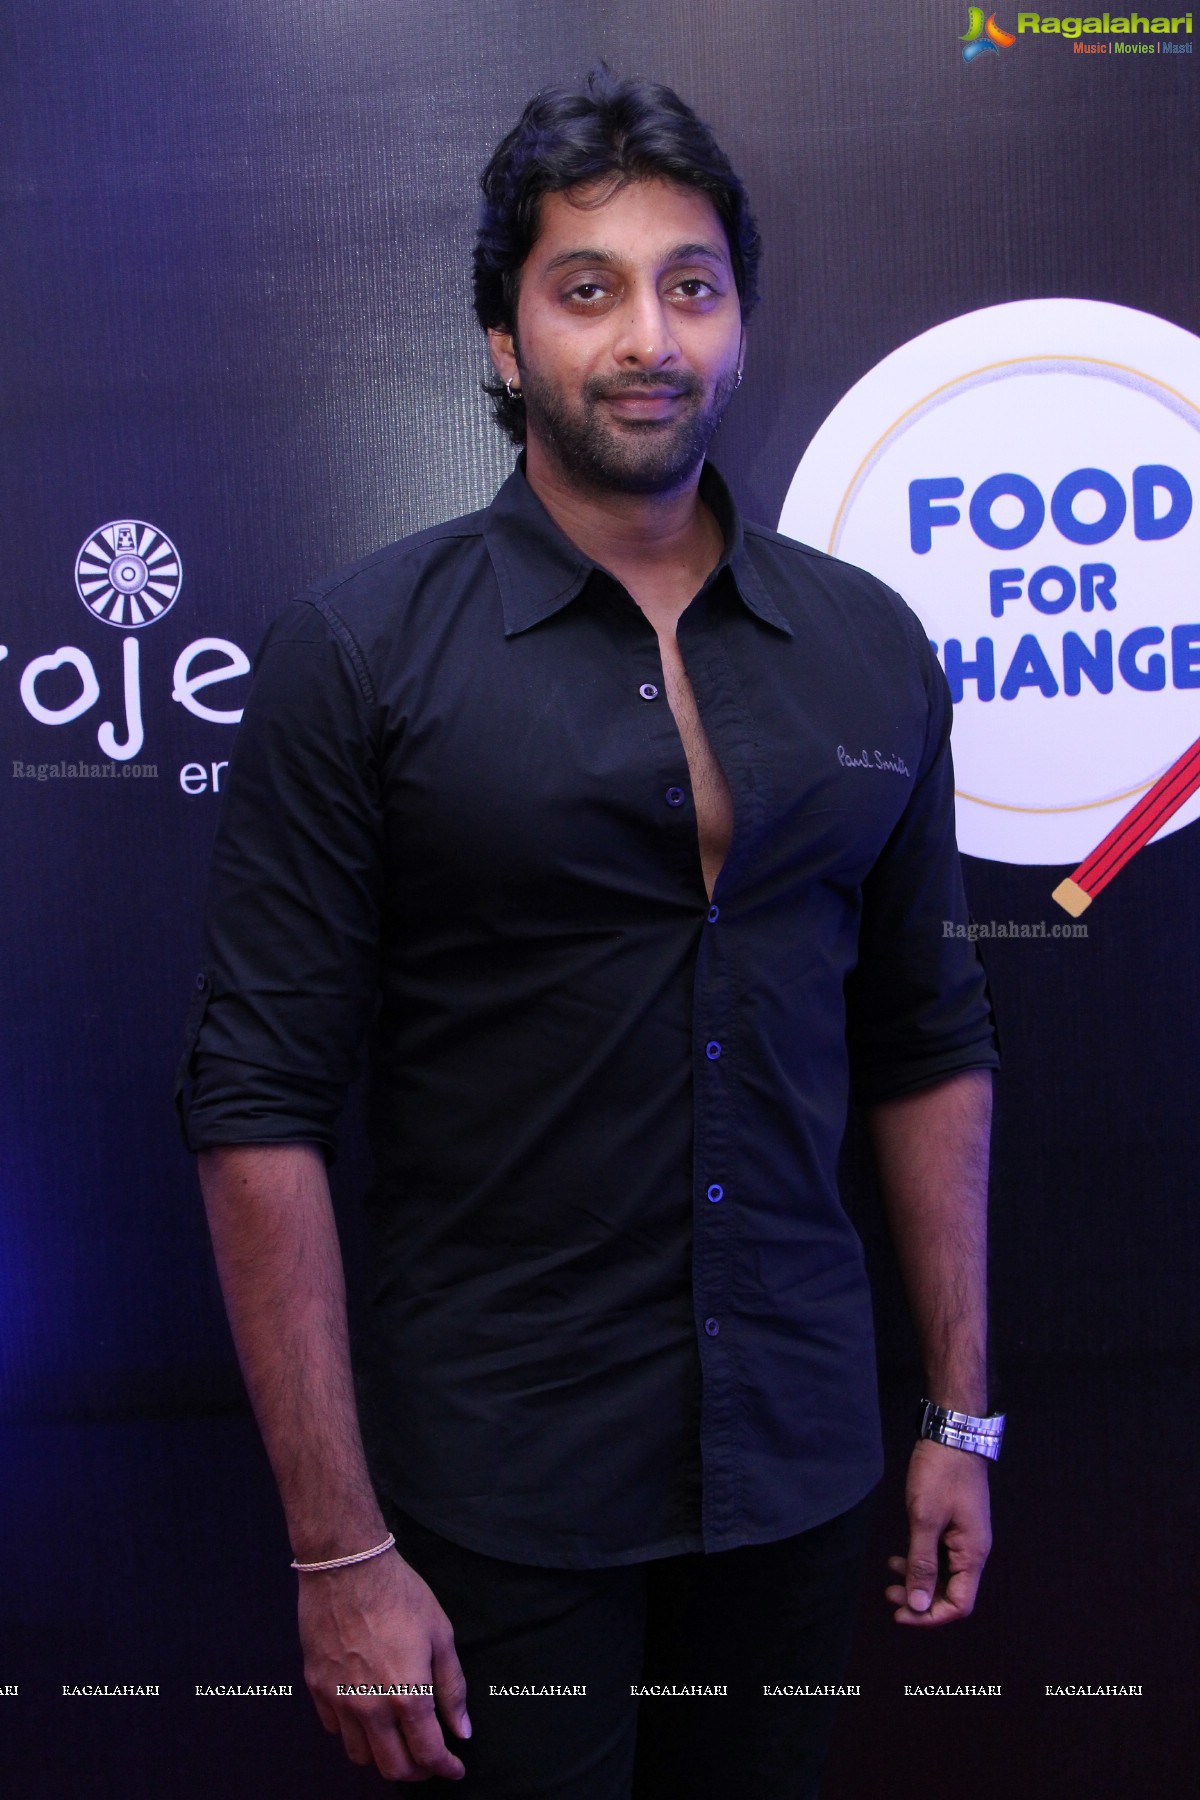 Project 511 - Food For Change Charity Show 2014